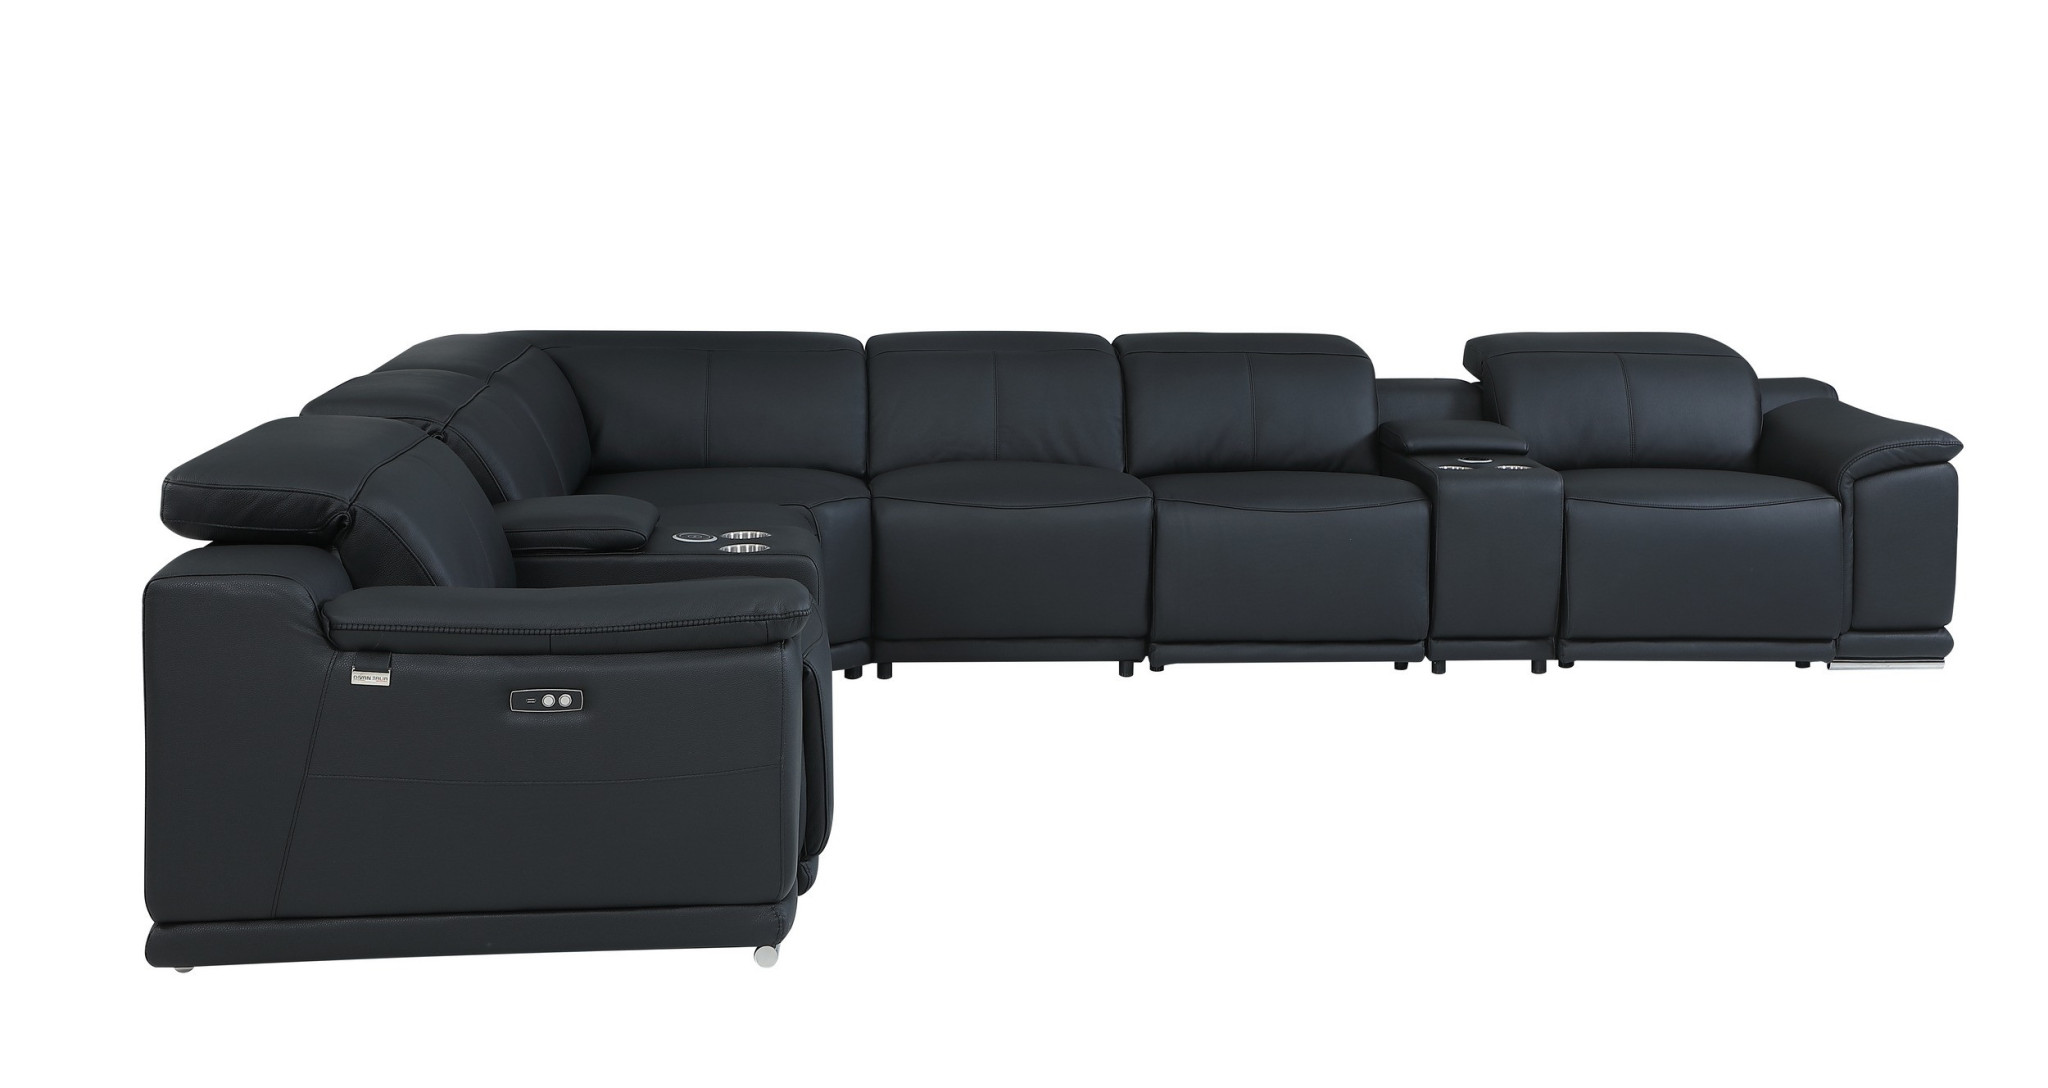 HomeRoots Black Italian Leather Power Reclining U Shaped Eight Piece Corner Sectional With Console